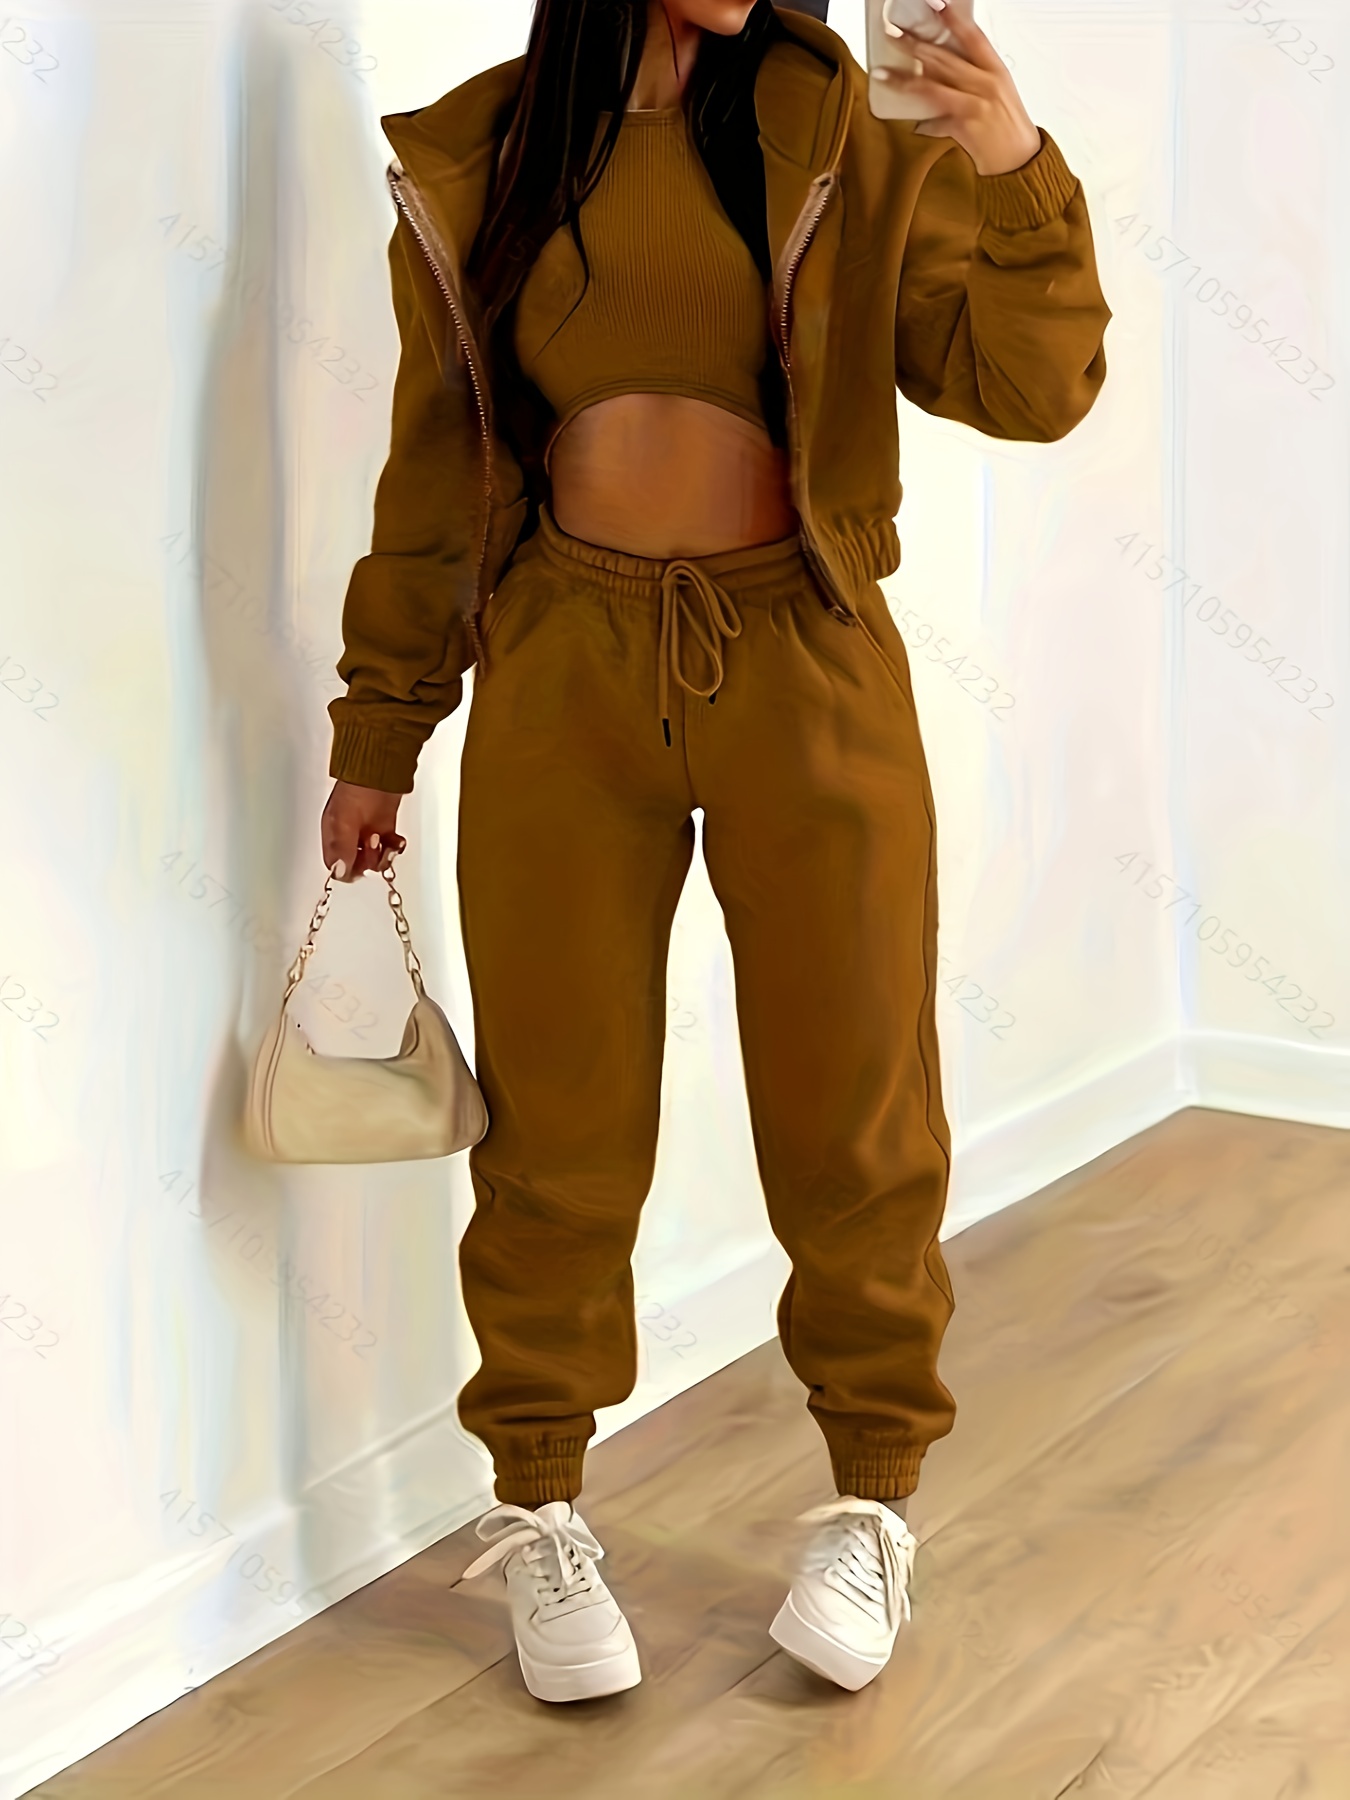 Women's 3-Piece Outfit: Designer Jacket, Casual Pants, and Sexy Shirt